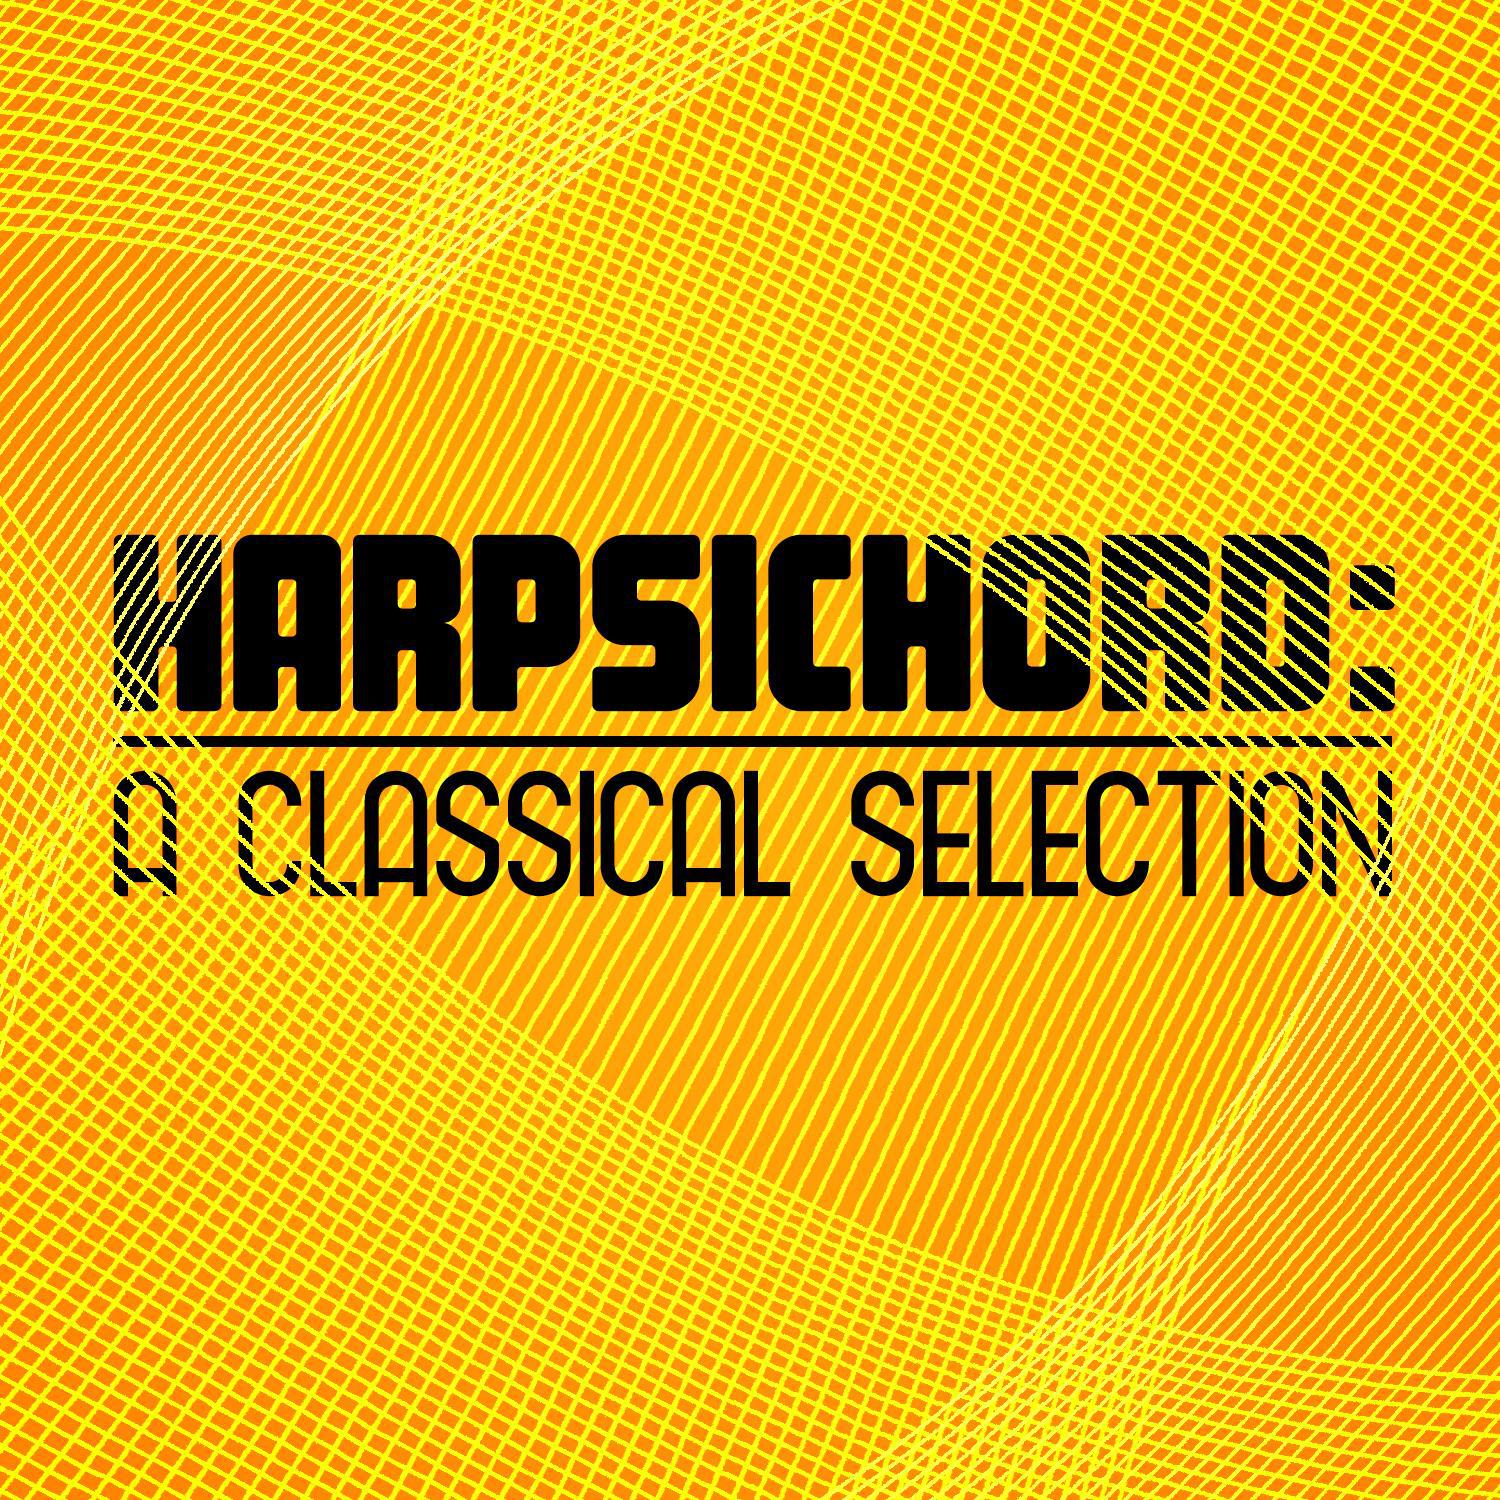 Harpsichord: A Classical Selection